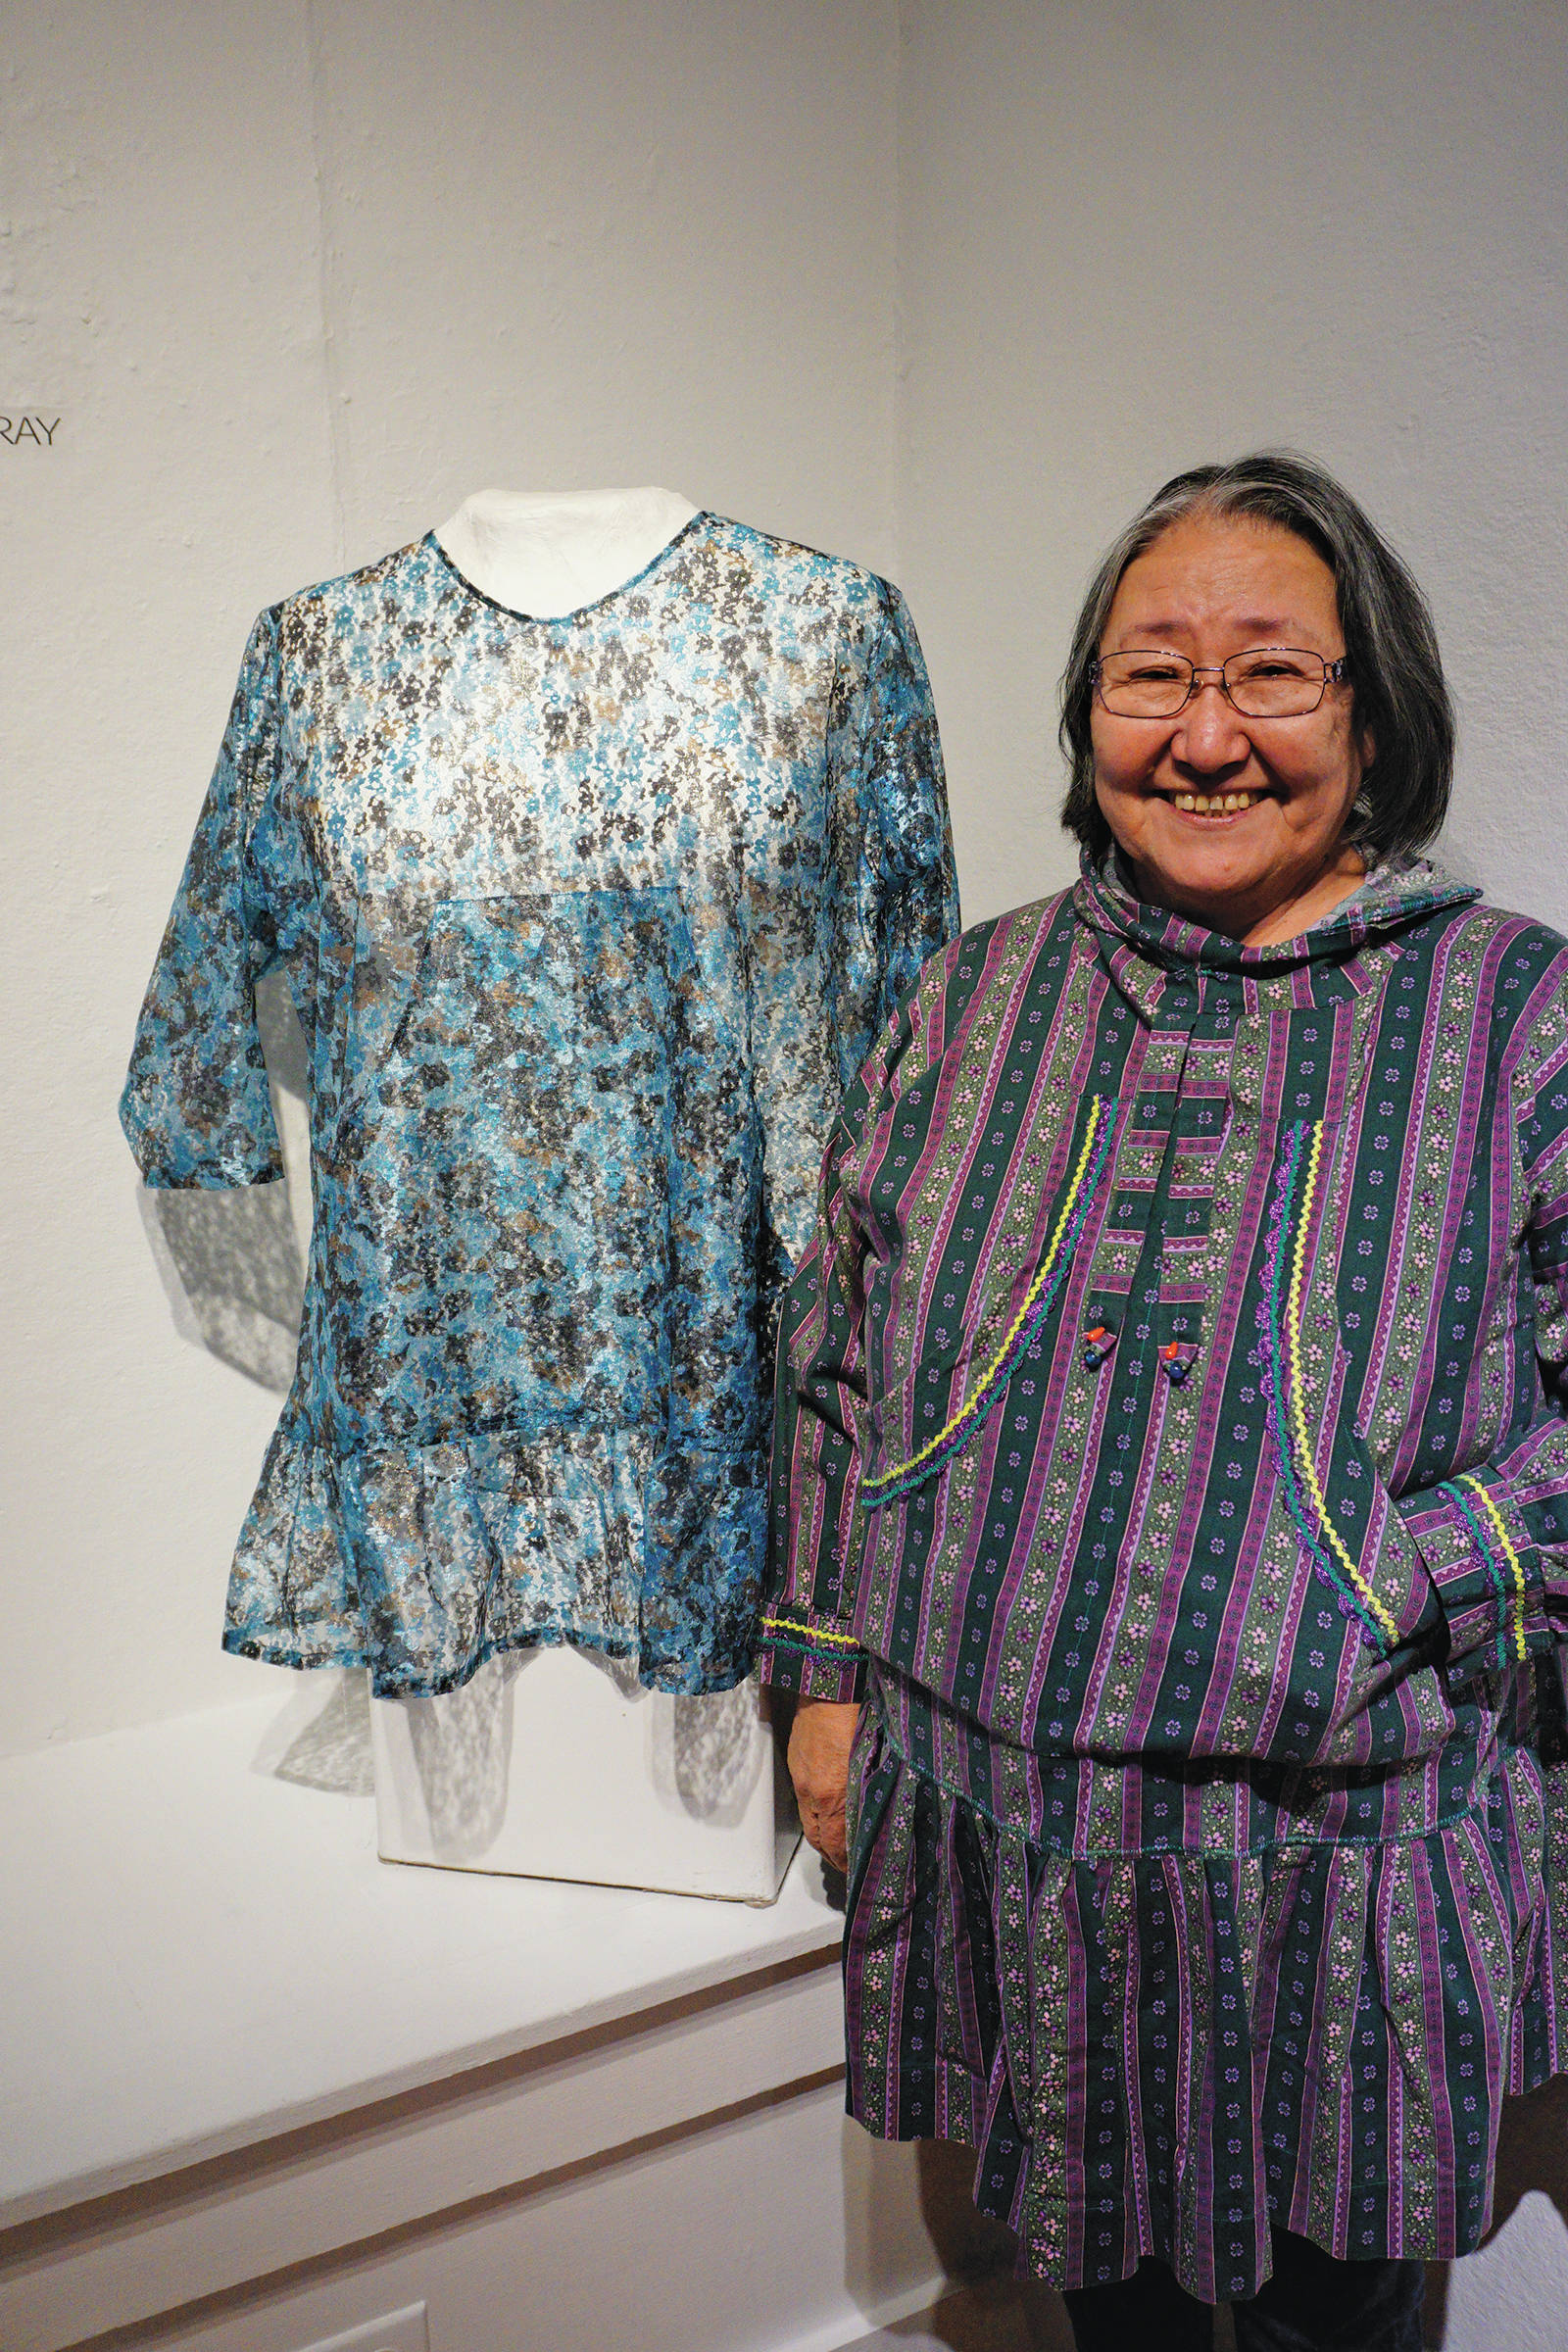 Homer artist Martha Murray stands by her kuspuk at the opening of the “Kuspuk/Qaspeq/Atikluk” show on Oct. 5, 2019, at Bunnell Street Arts Center in Homer, Alaska. (Photo by Michael Armstrong/Homer News)